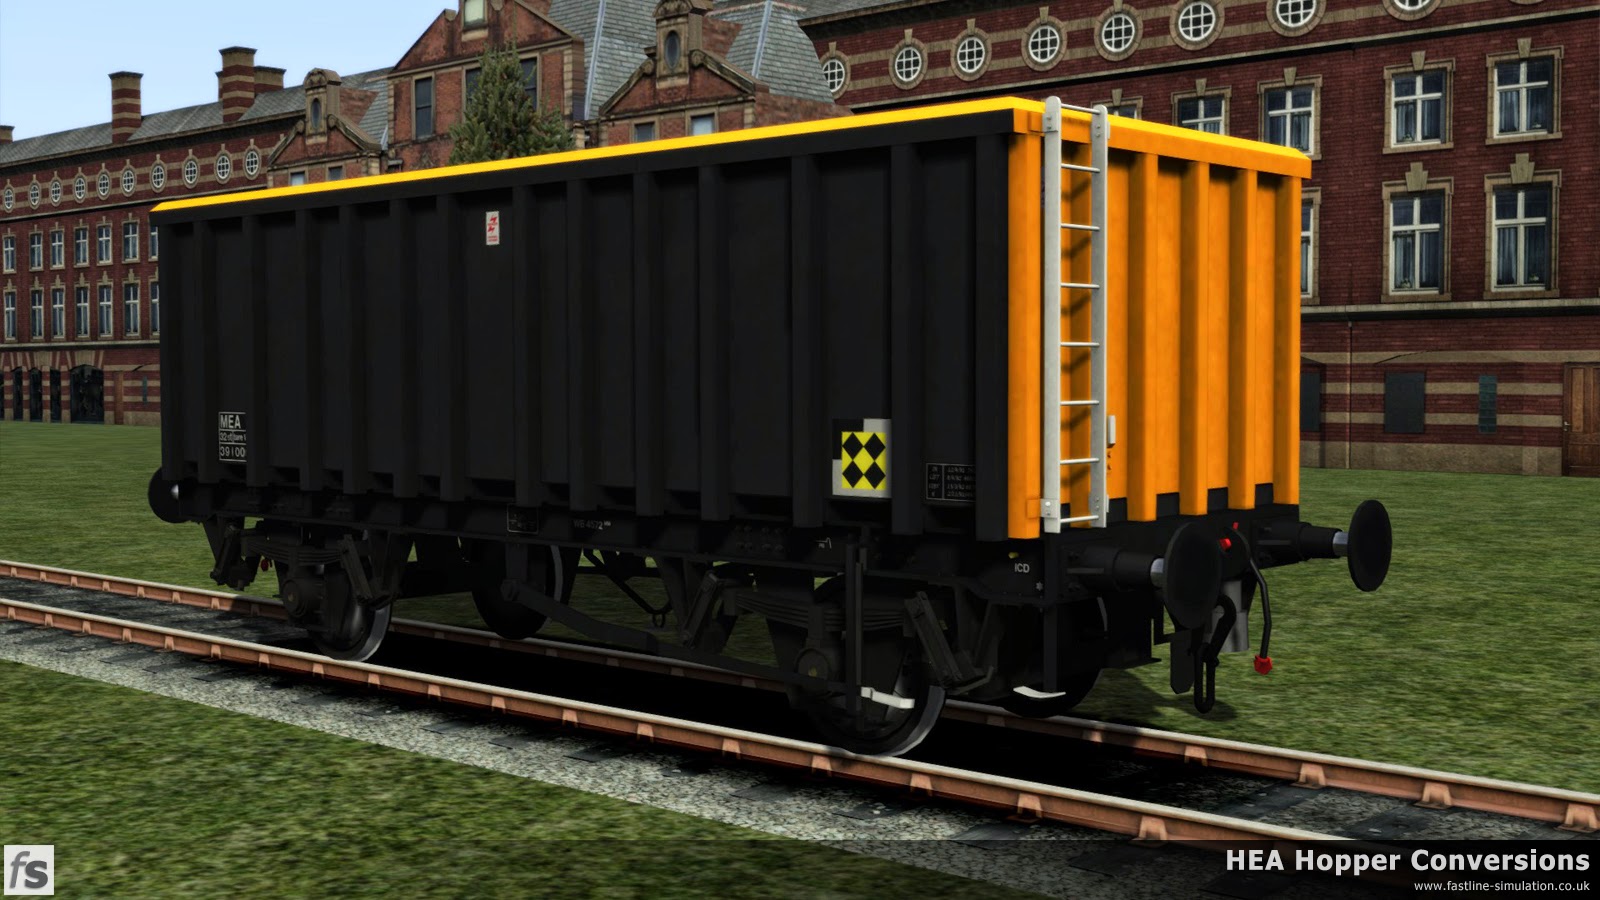 Fastline Simulation - HEA Conversions: The first of the MEA conversions in Railfreight Sector livery complete with Trainload Coal branding poses for the official photographer on the works lawn.